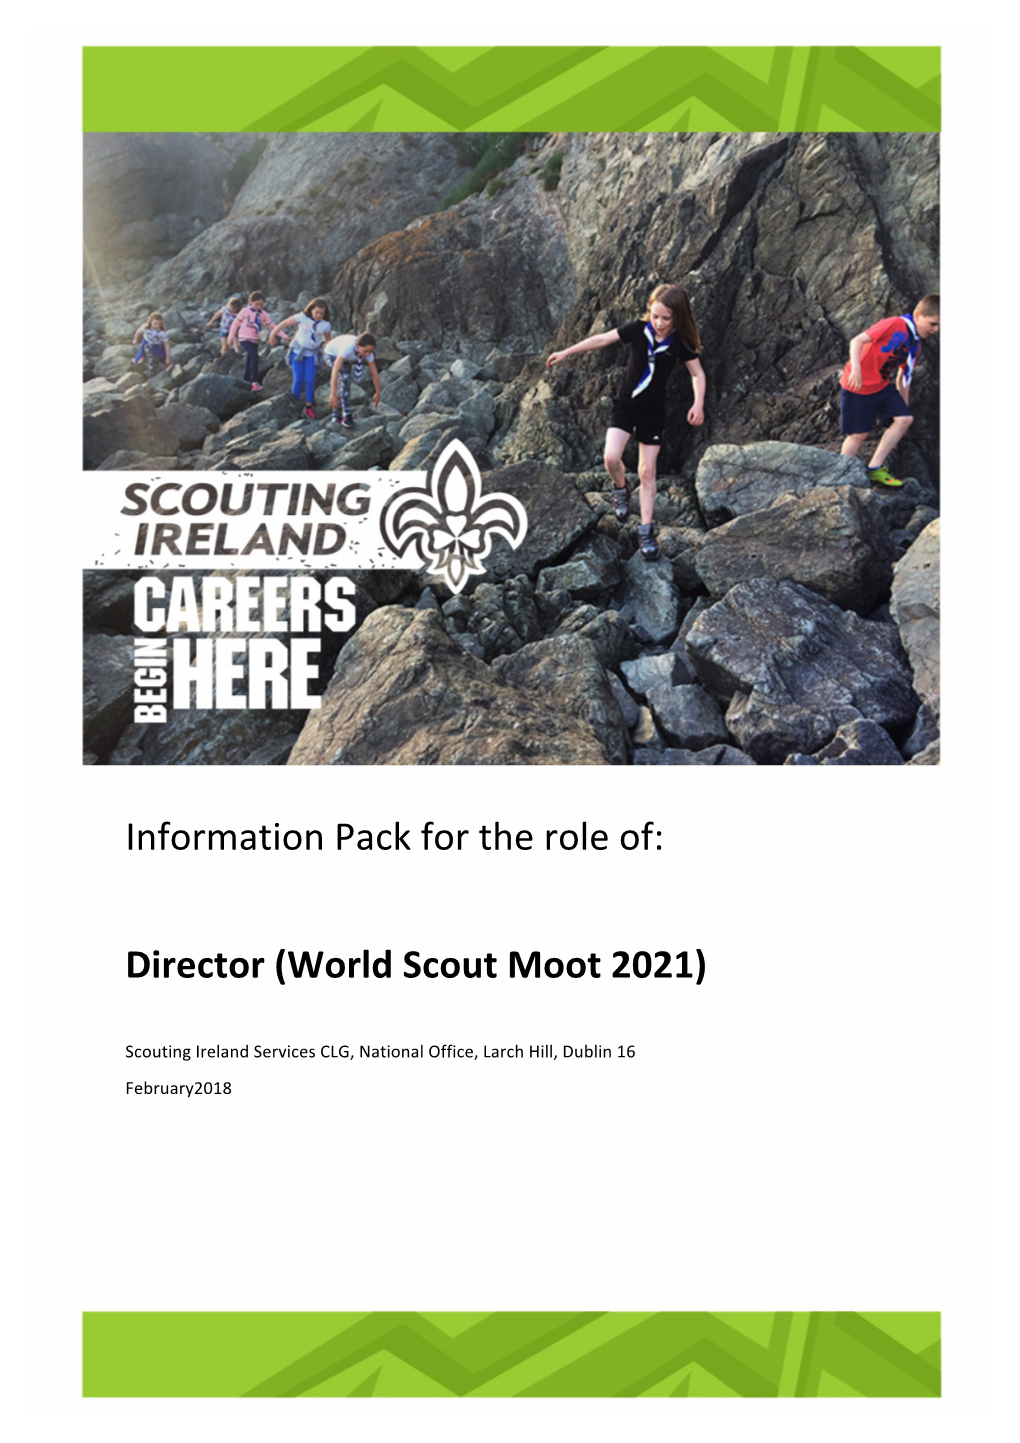 Director (World Scout Moot 2021)